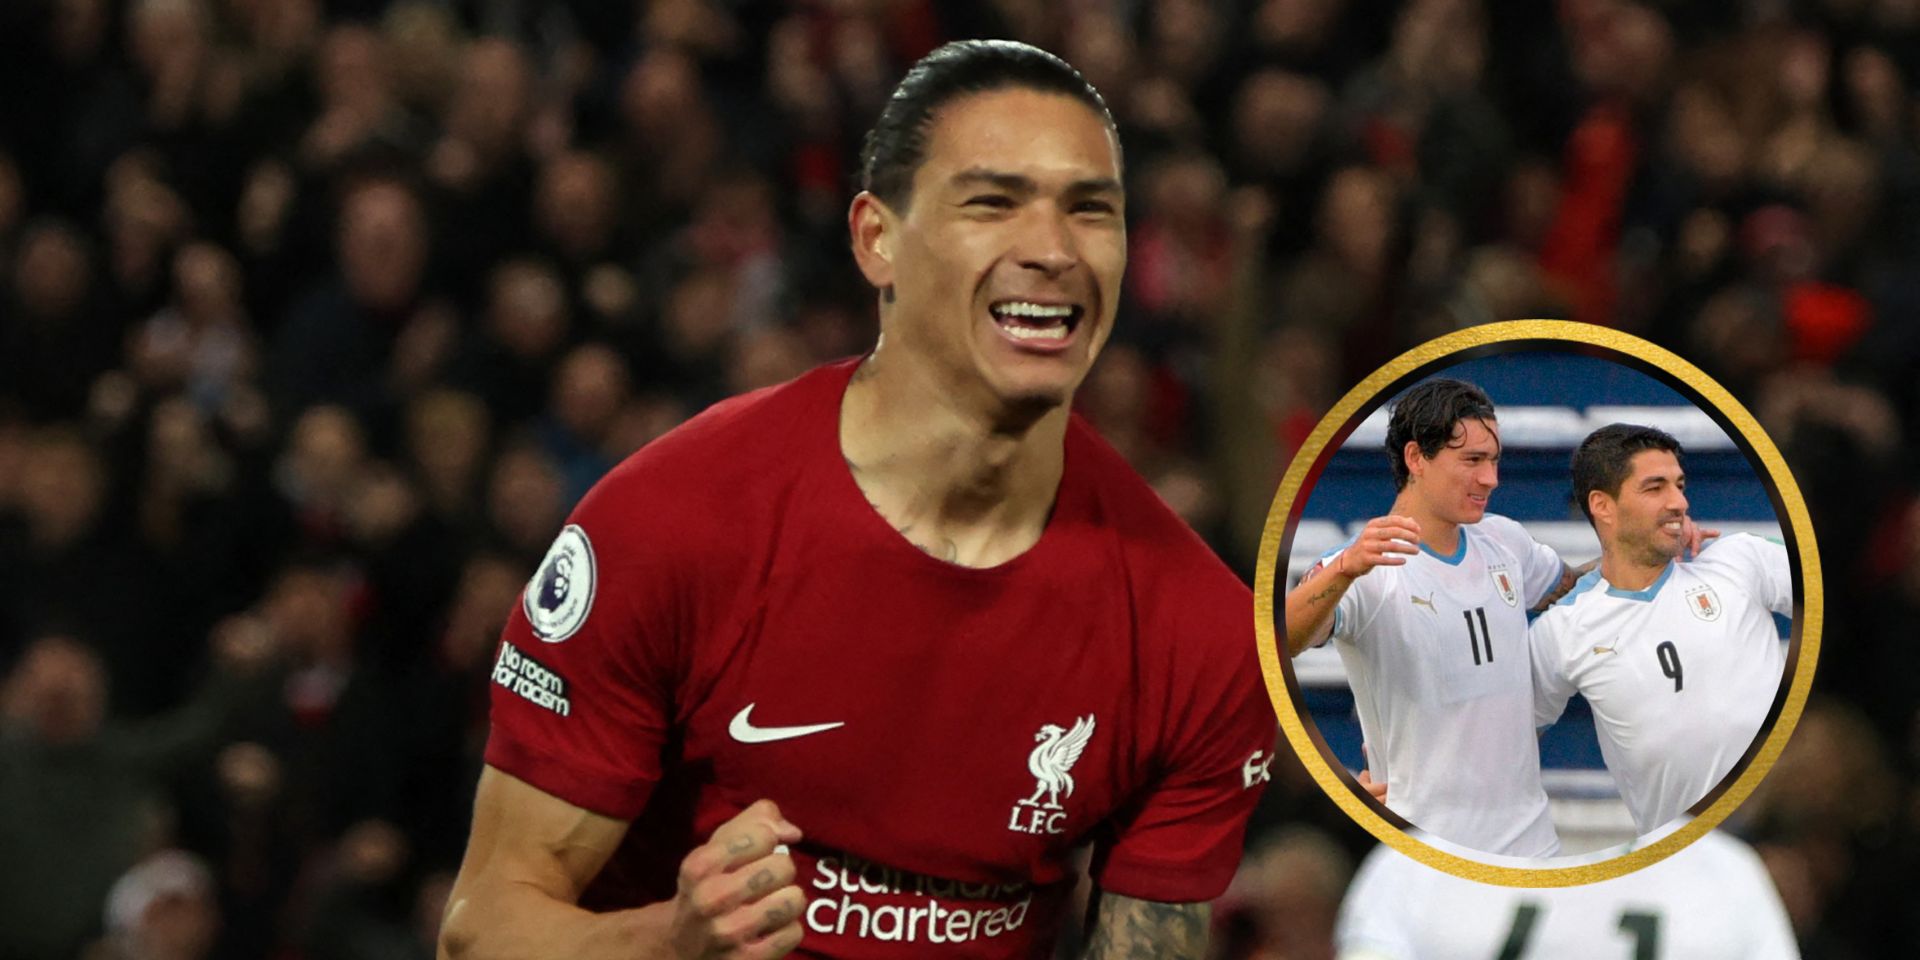 ‘The first of many’ – Suarez sends message to Nunez and praises Liverpool fans after maiden Anfield goal